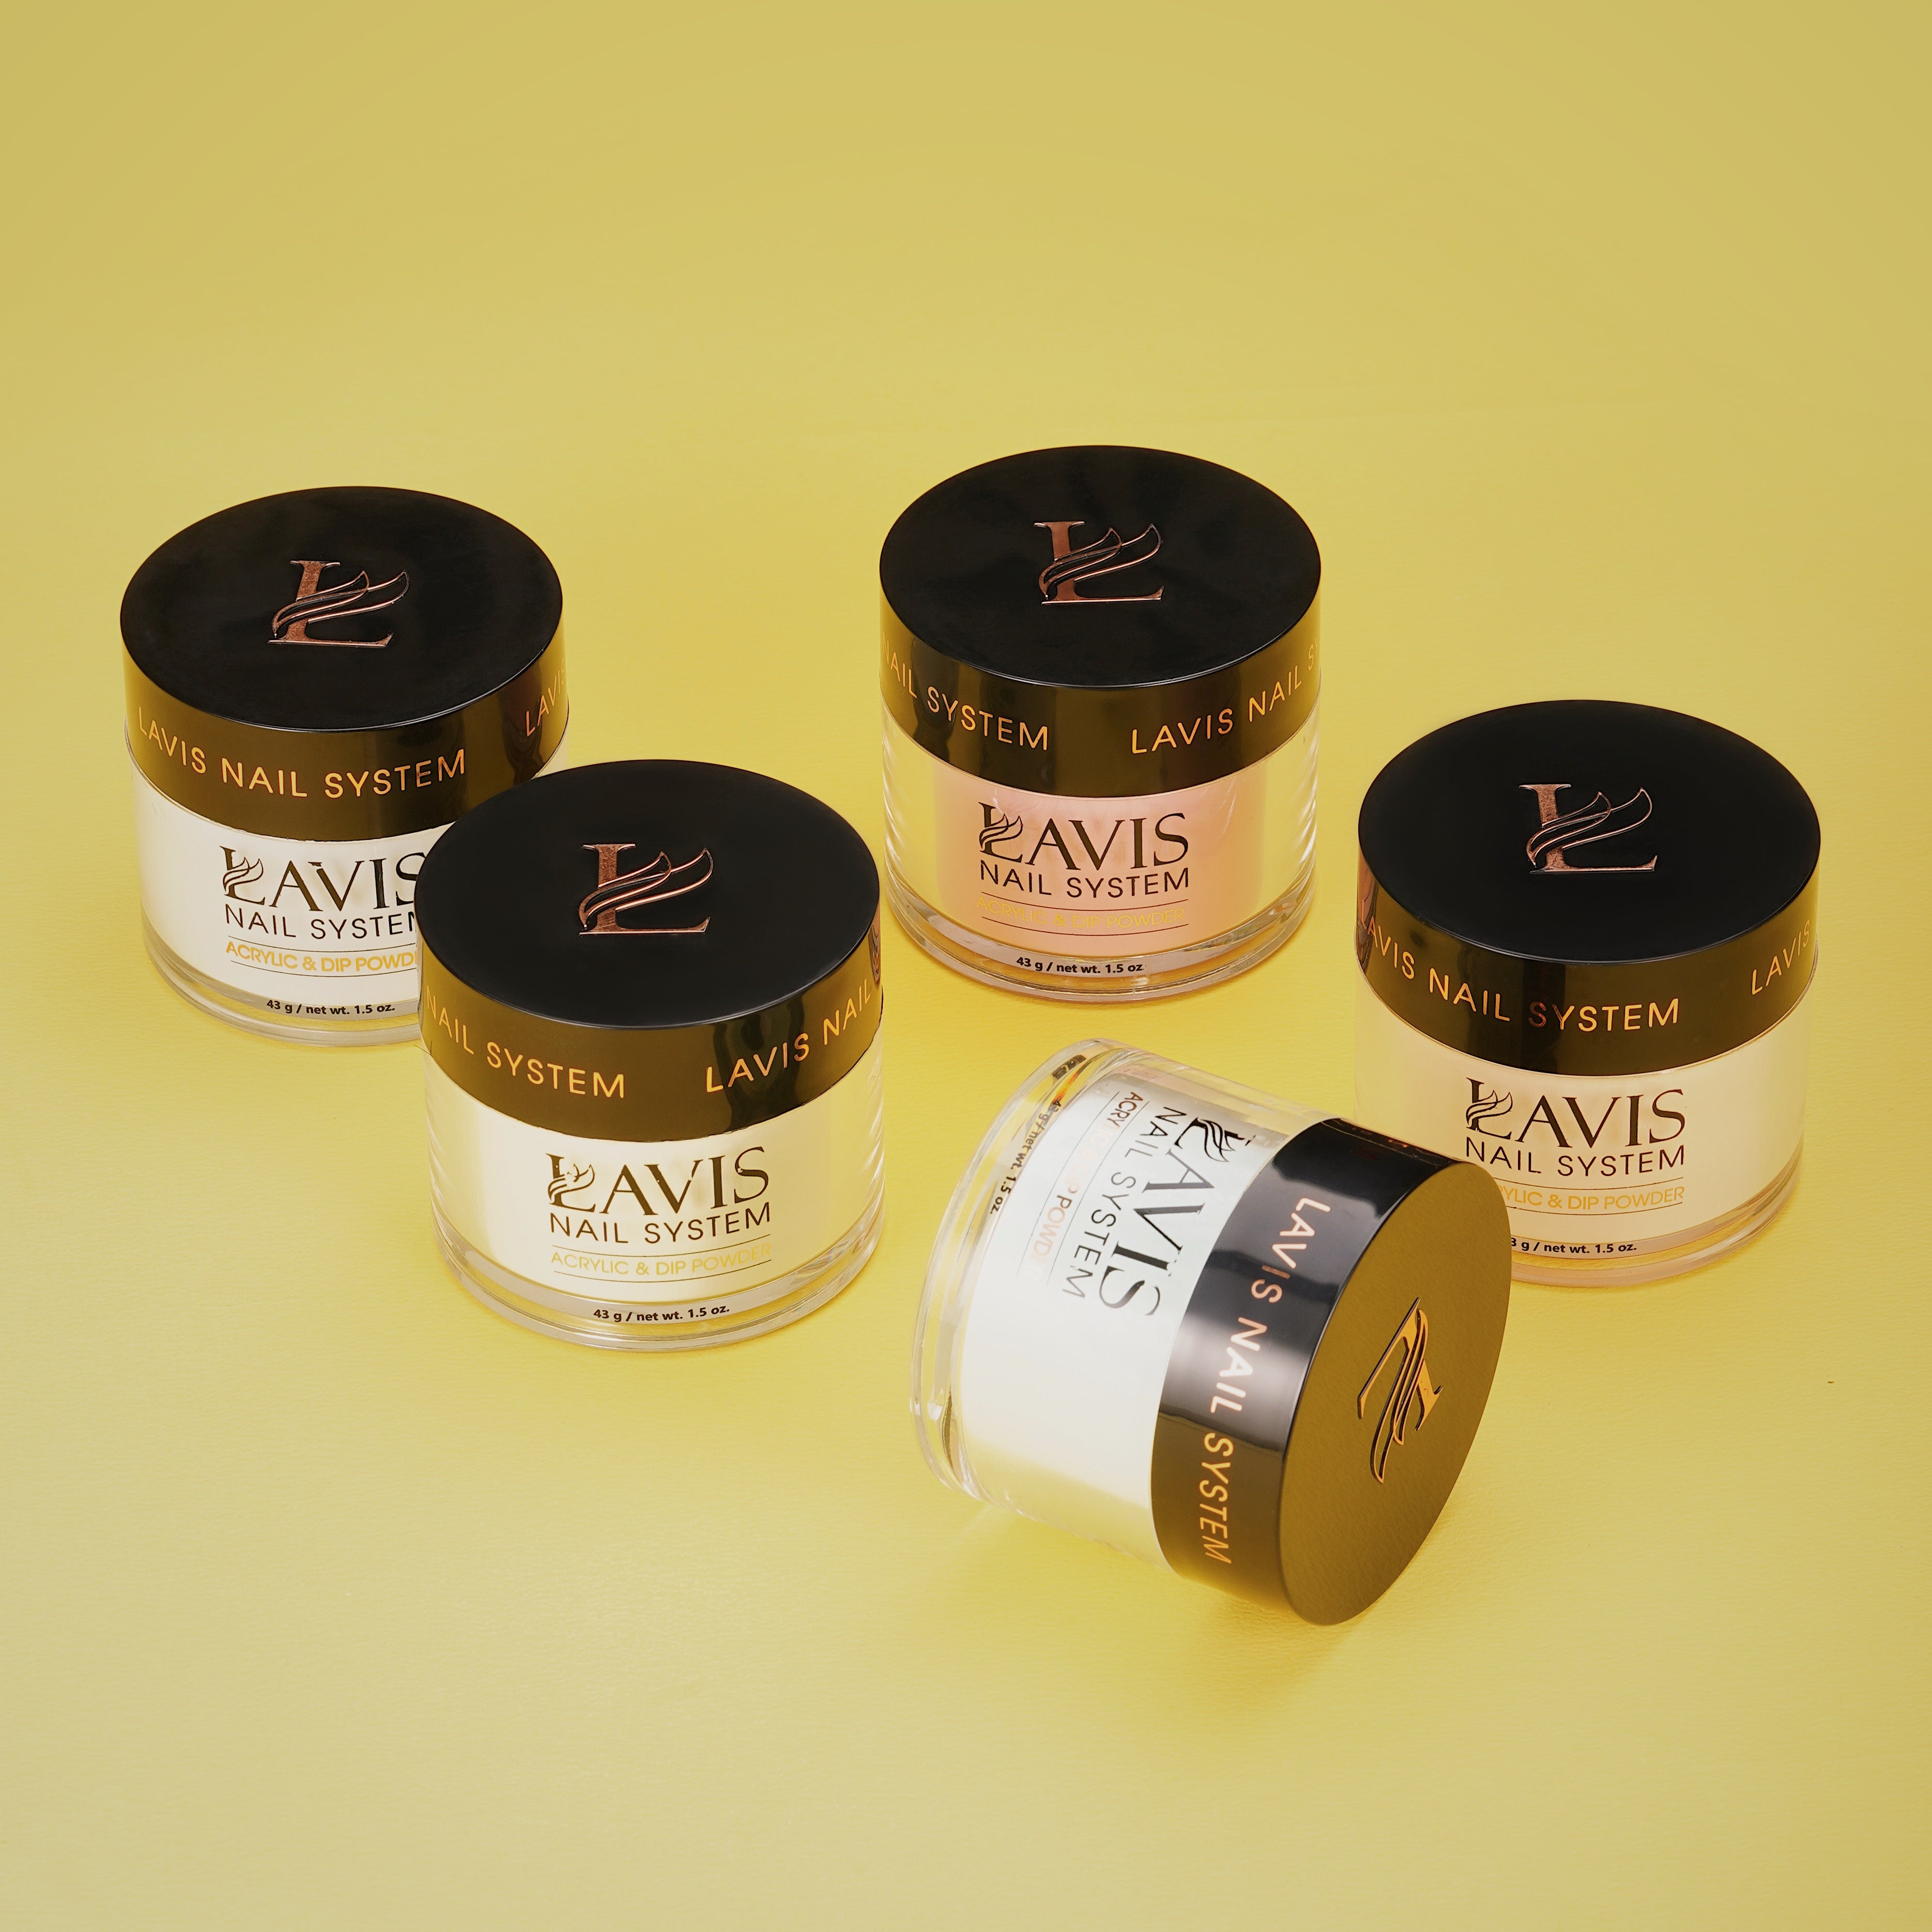 SWEET TALK - LAVIS Holiday Dipping Powder Collection: 002, 003, 004, 009, 022, 023, 068, 069, 078